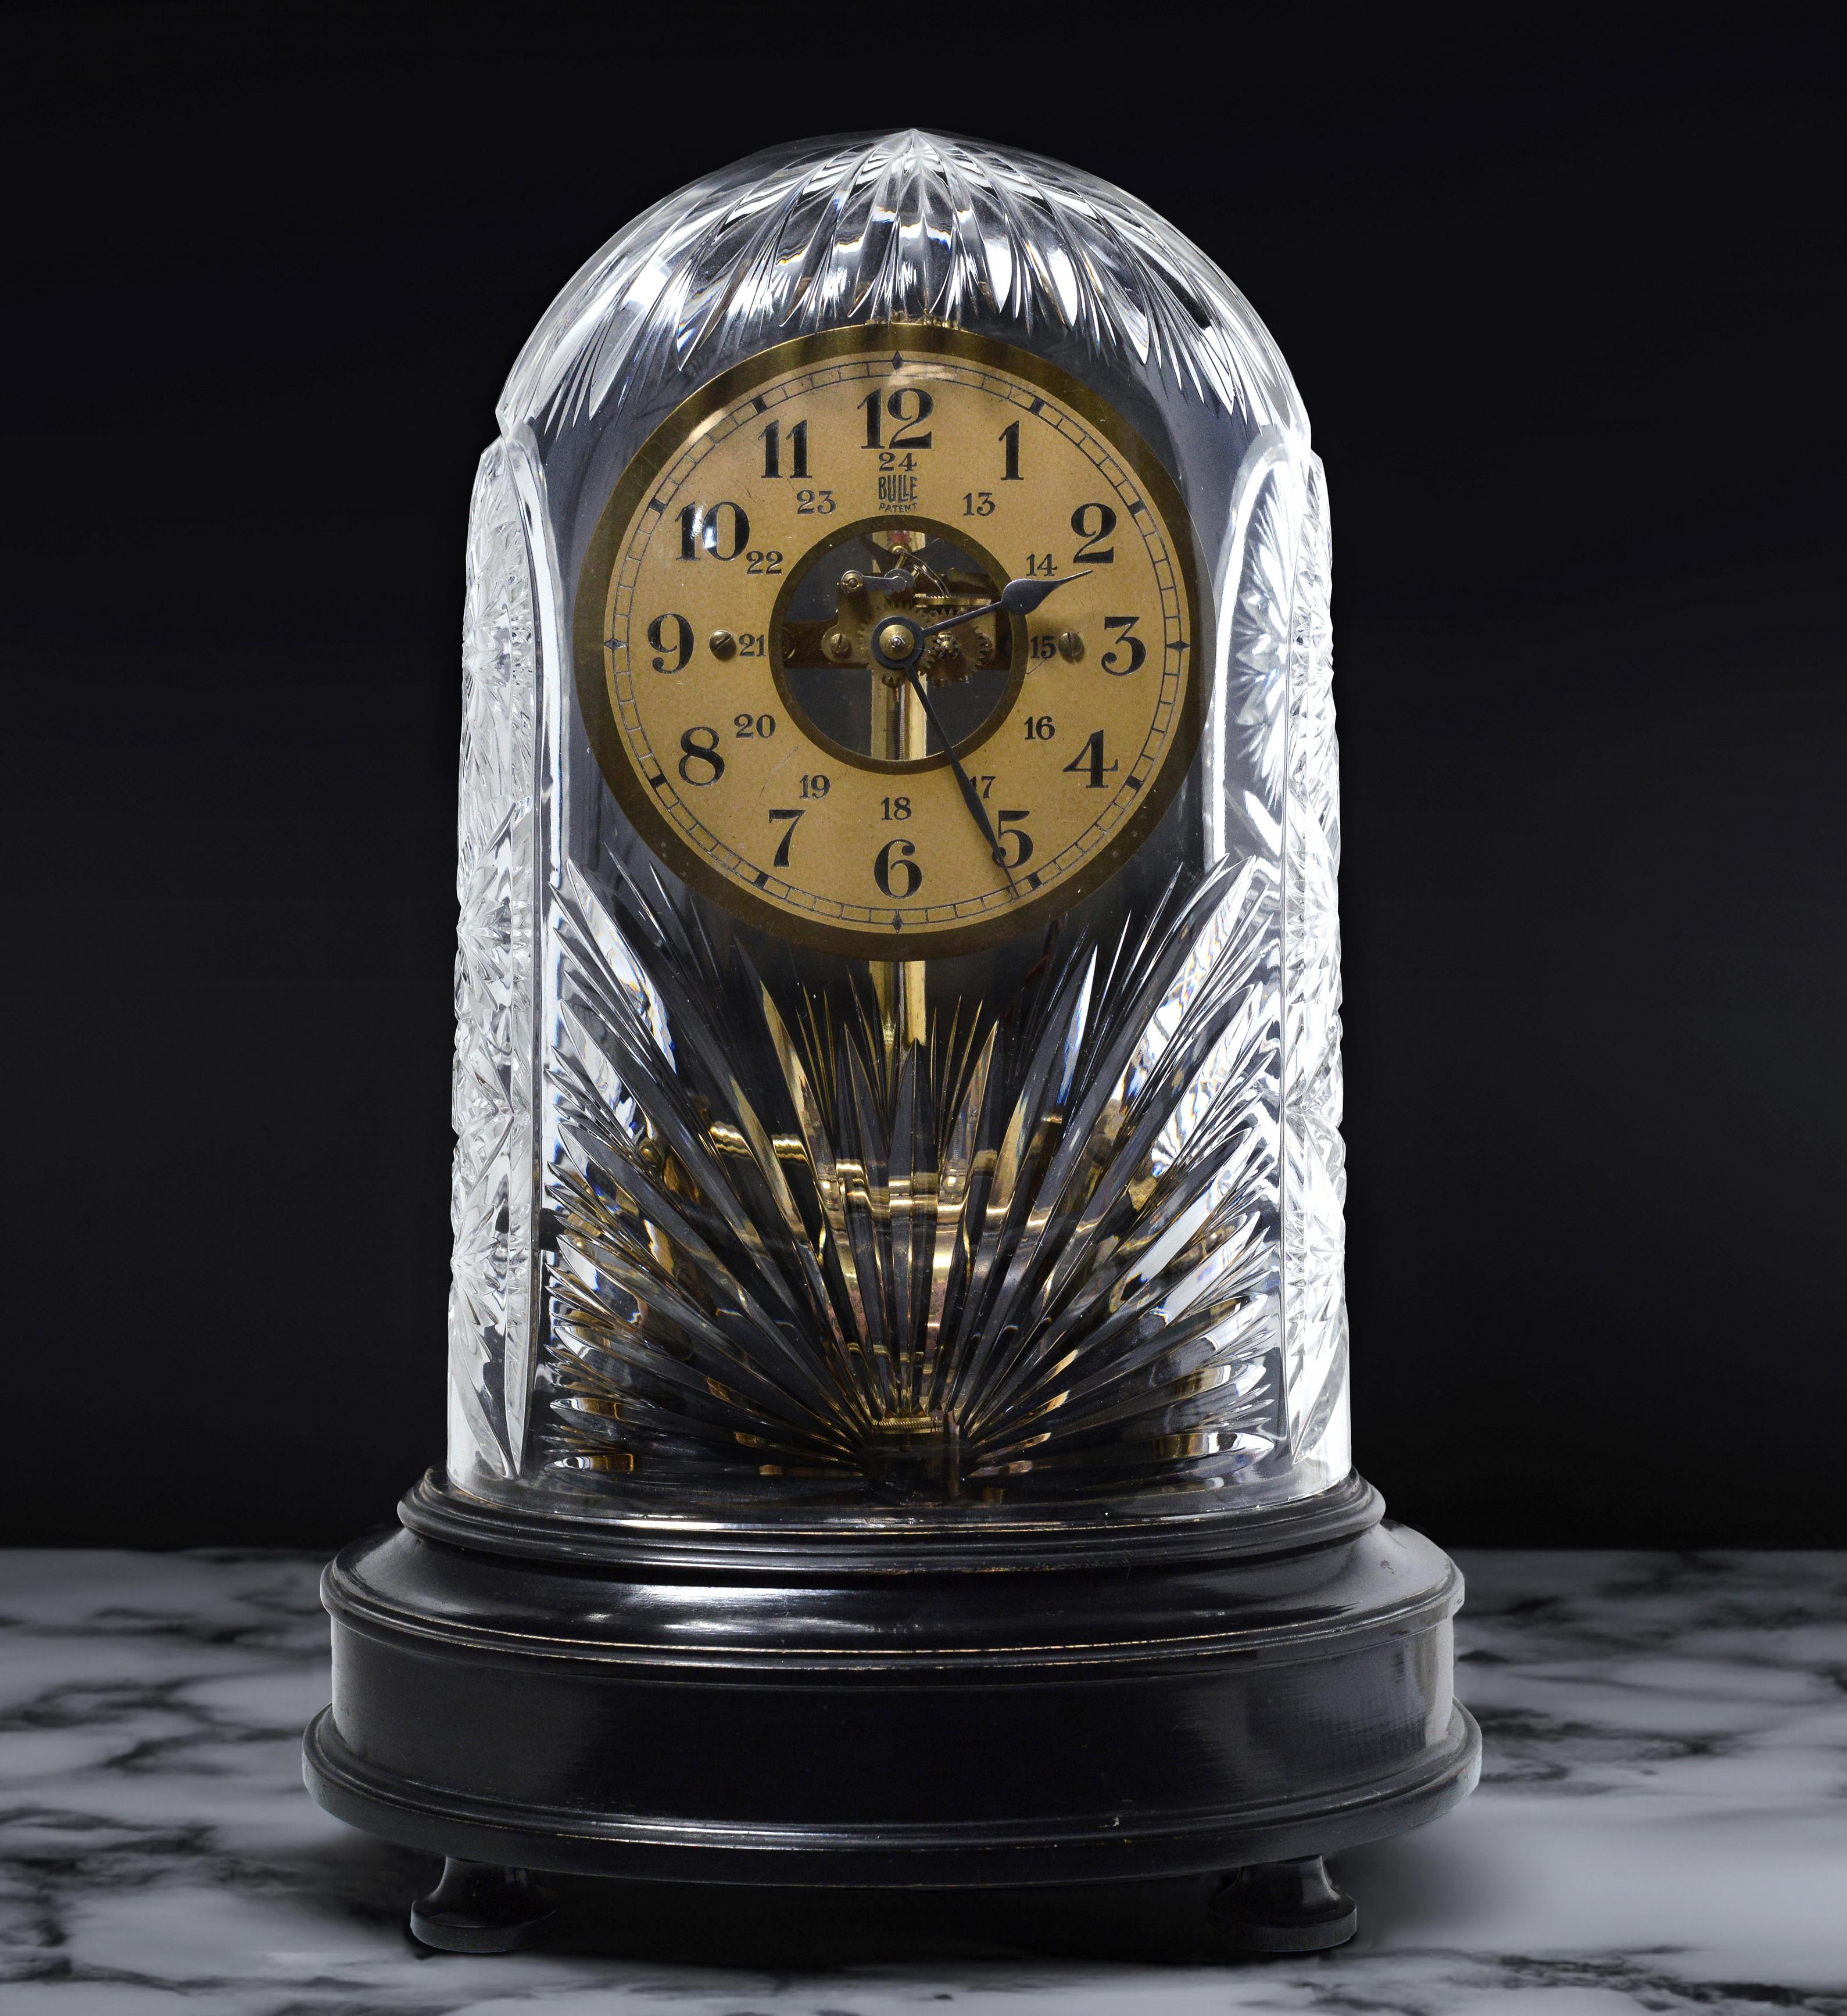 Legendary creation of French inventors and Swedish glass works cooperation from Art Deco epoque (circa 1930s). Brass electromagnetic movement. Dial with Arabic numerals. On plinth of blackened wood. Hand cut crystal glass dome (awesome and rare